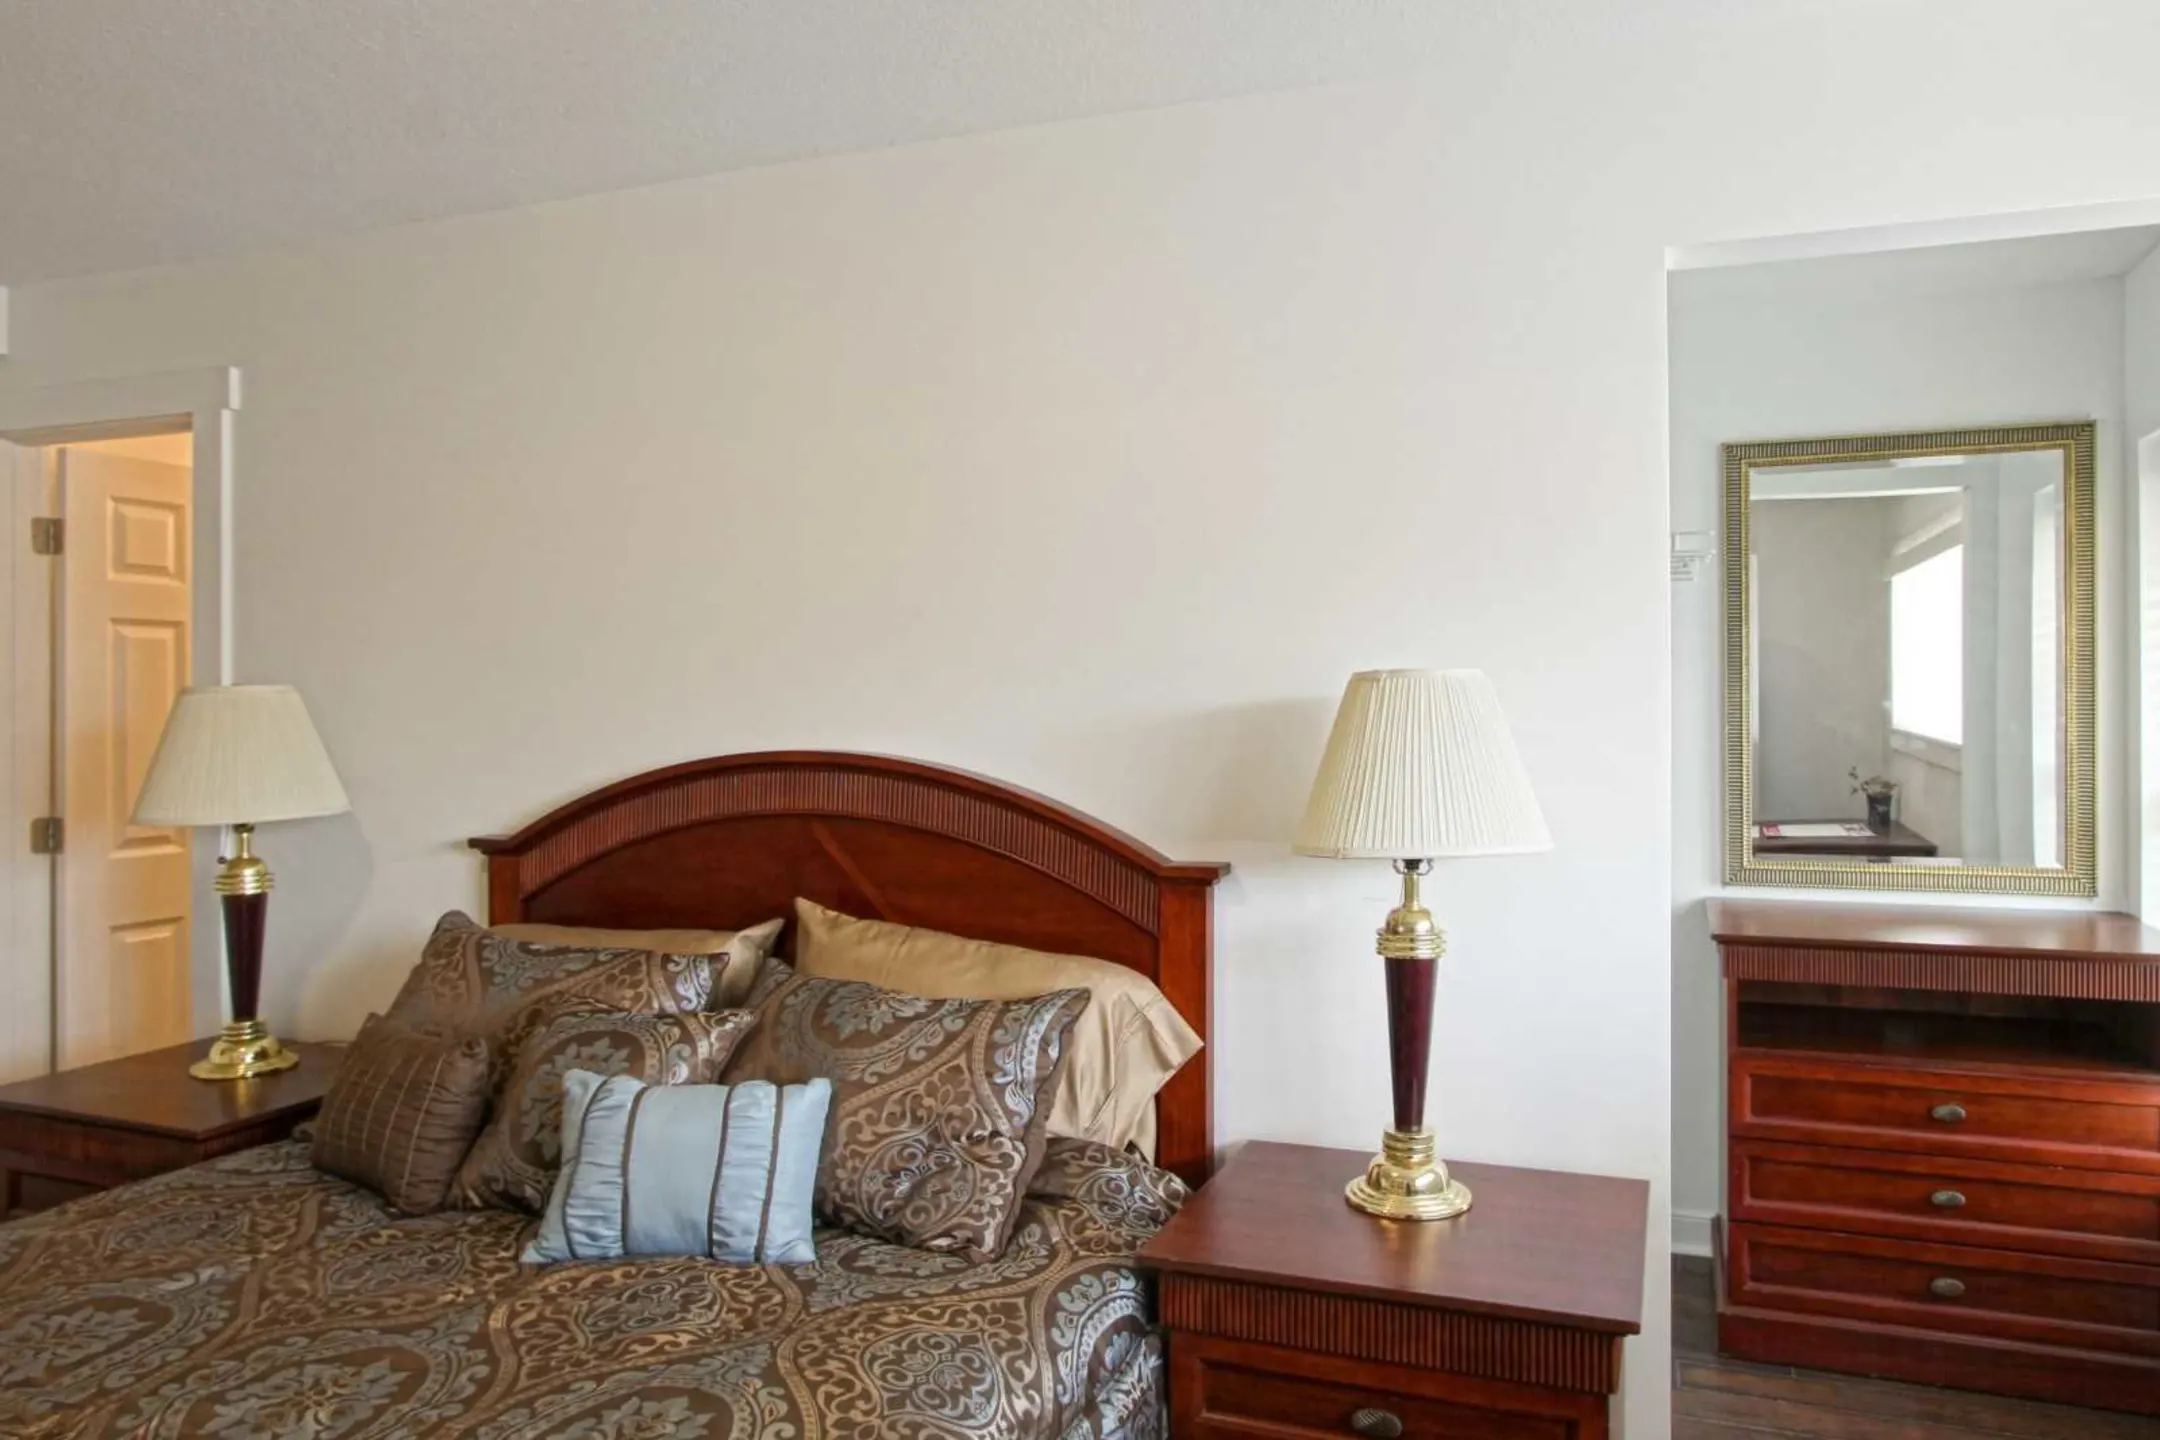 Bedroom - Woodworth Park Apartments - North Lima, OH